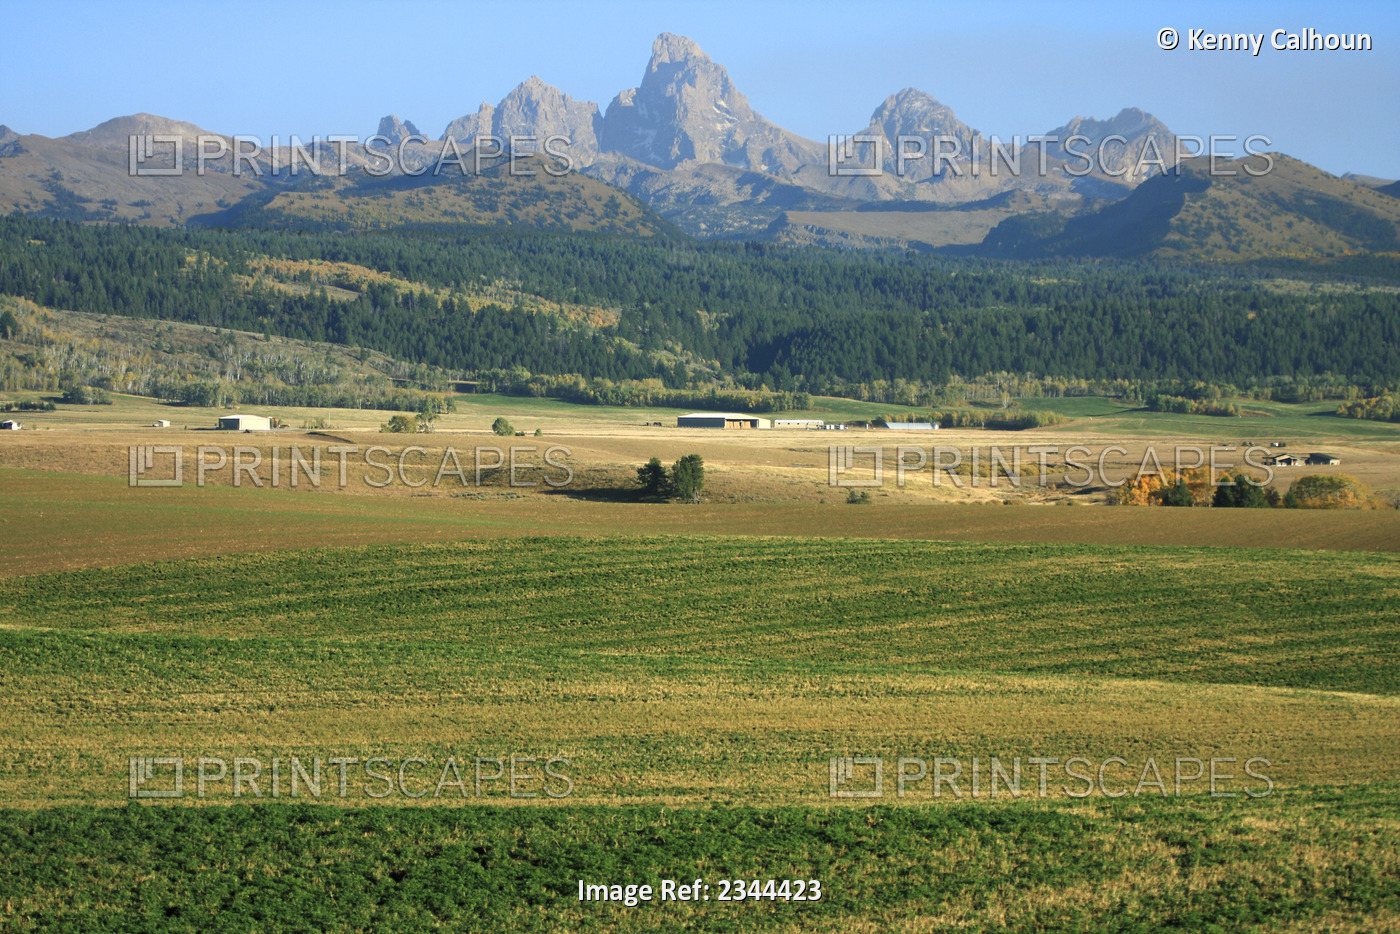 Agriculture - Ranch land and buildings with the Grand Teton mountains in the ...